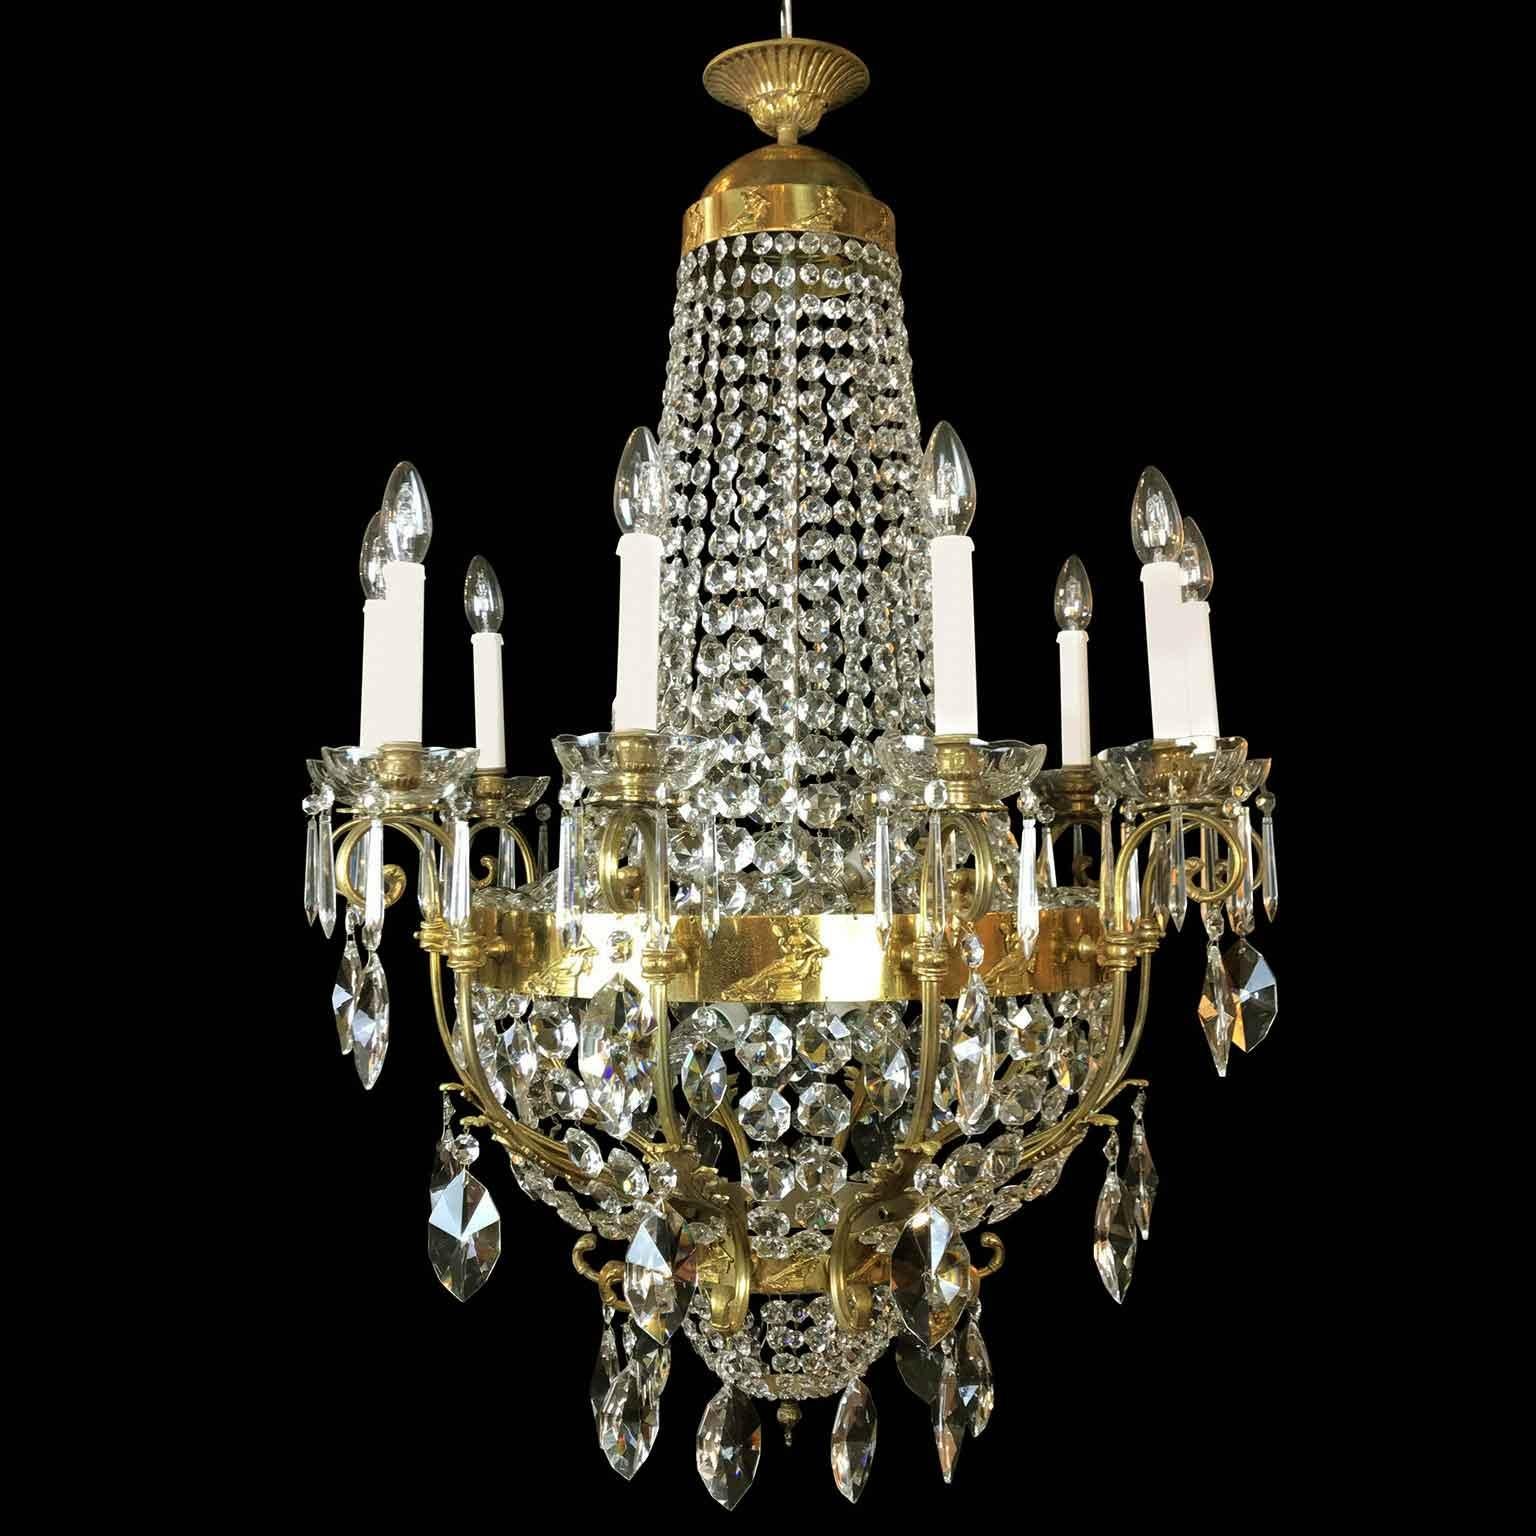 A 20th century Italian seventeen-light crystal chandelier richly decorated with waterfall crystal festoons and pendants, realized with a Neoclassical style ormolu frame decorated by casted Roman Matron figures seated on dormeuse with palmetta shaped